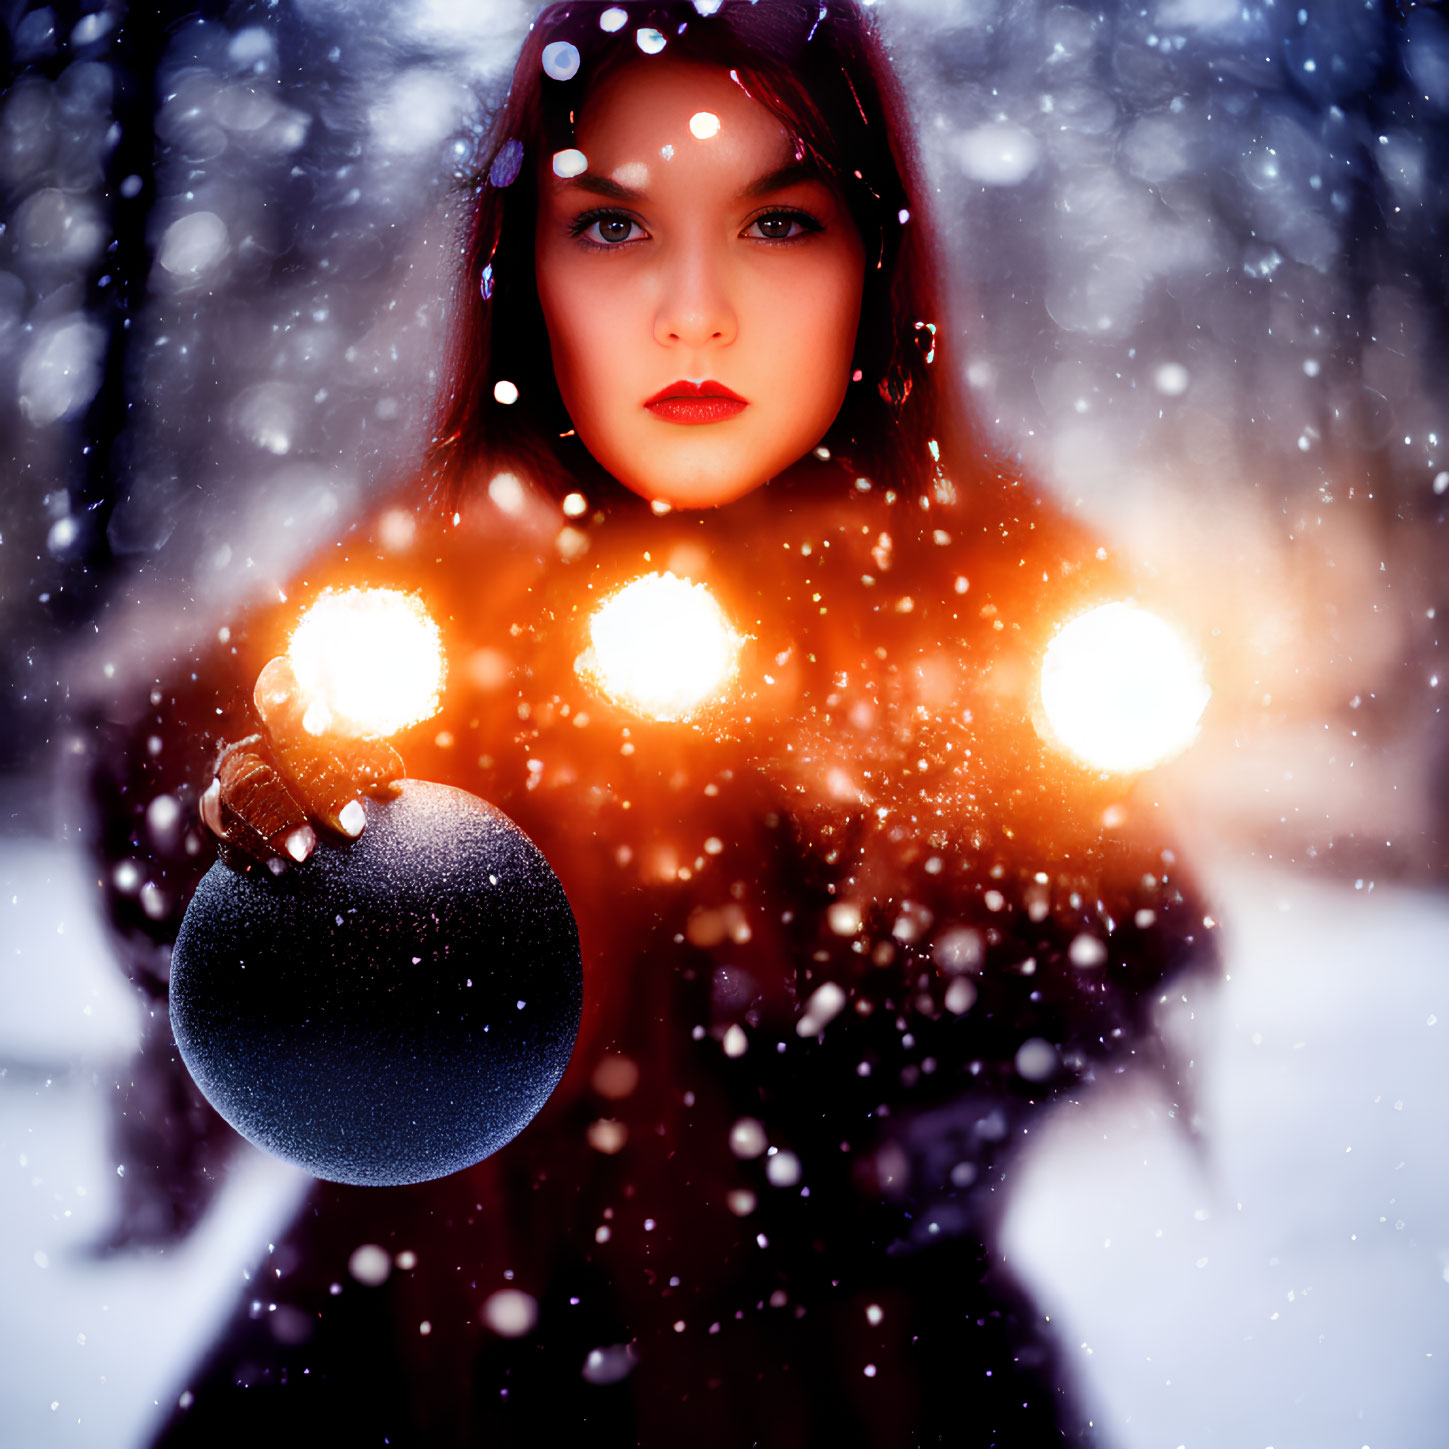 Woman holding illuminated orb in winter setting with enchanting gaze